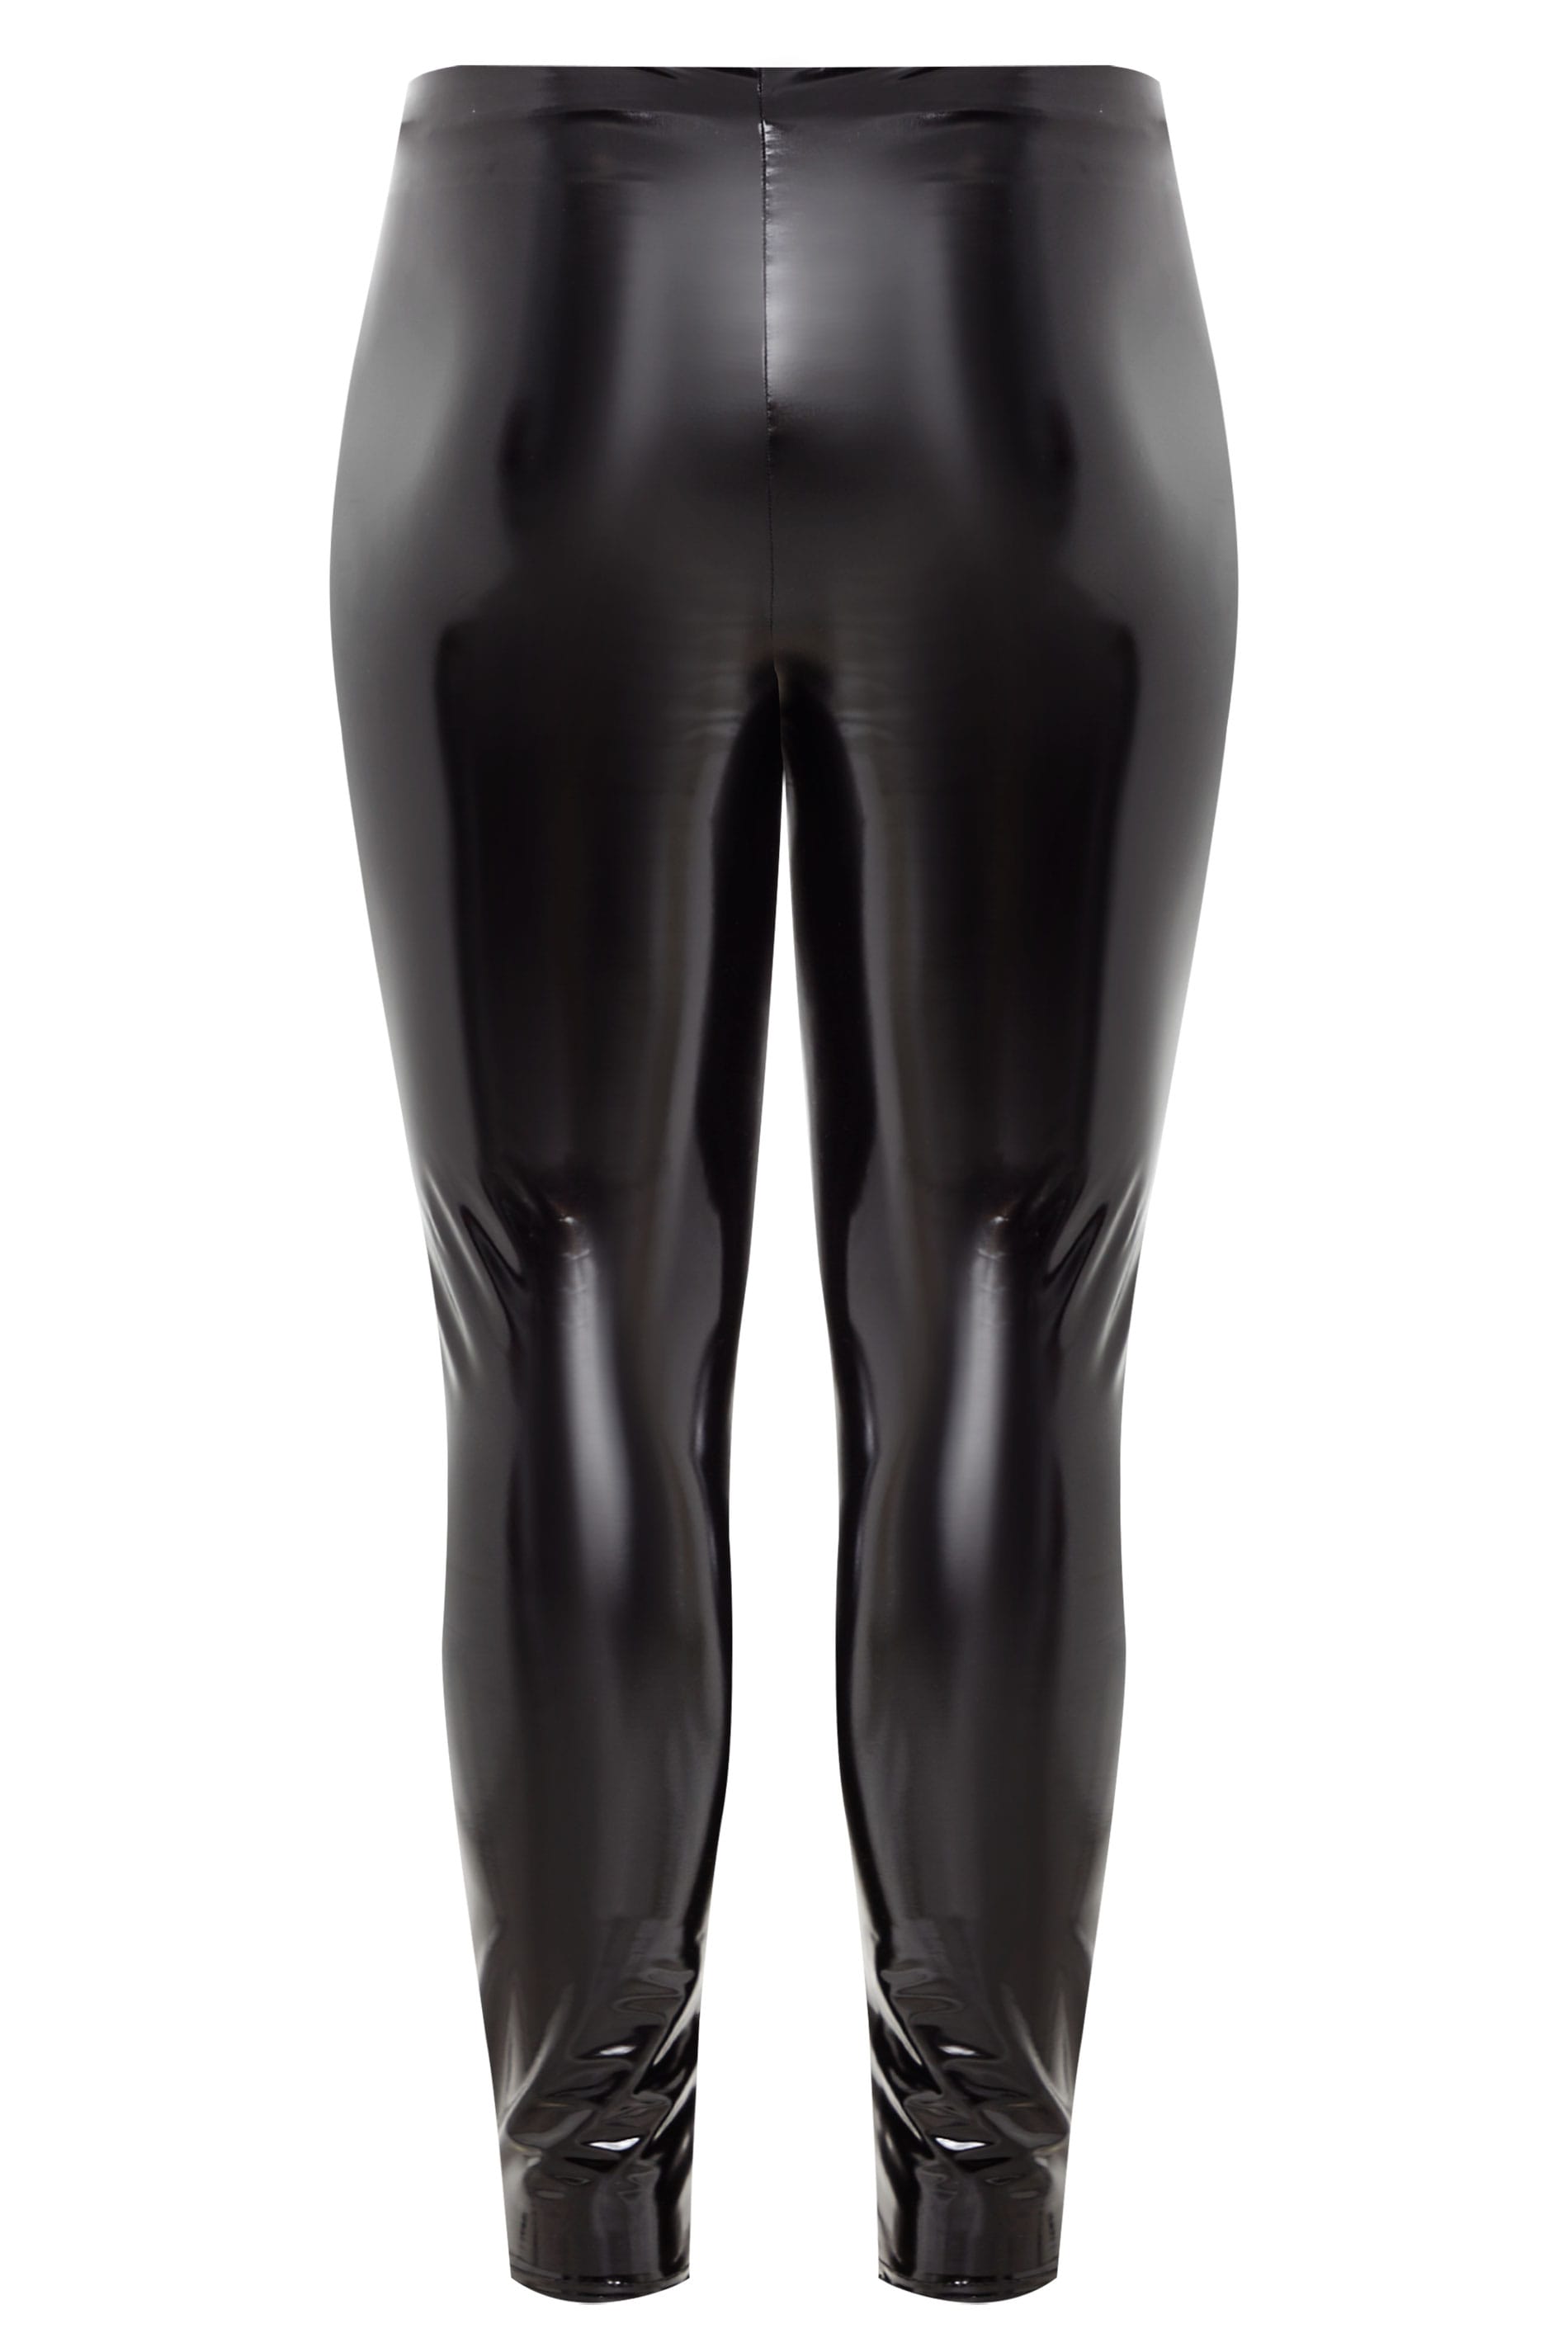 Women Shiny PU Leather White PVC Pants Slims Plus Size Sexy Leggings Latex  Stretchy High Waist Bodycon Pants Summer Trousers 